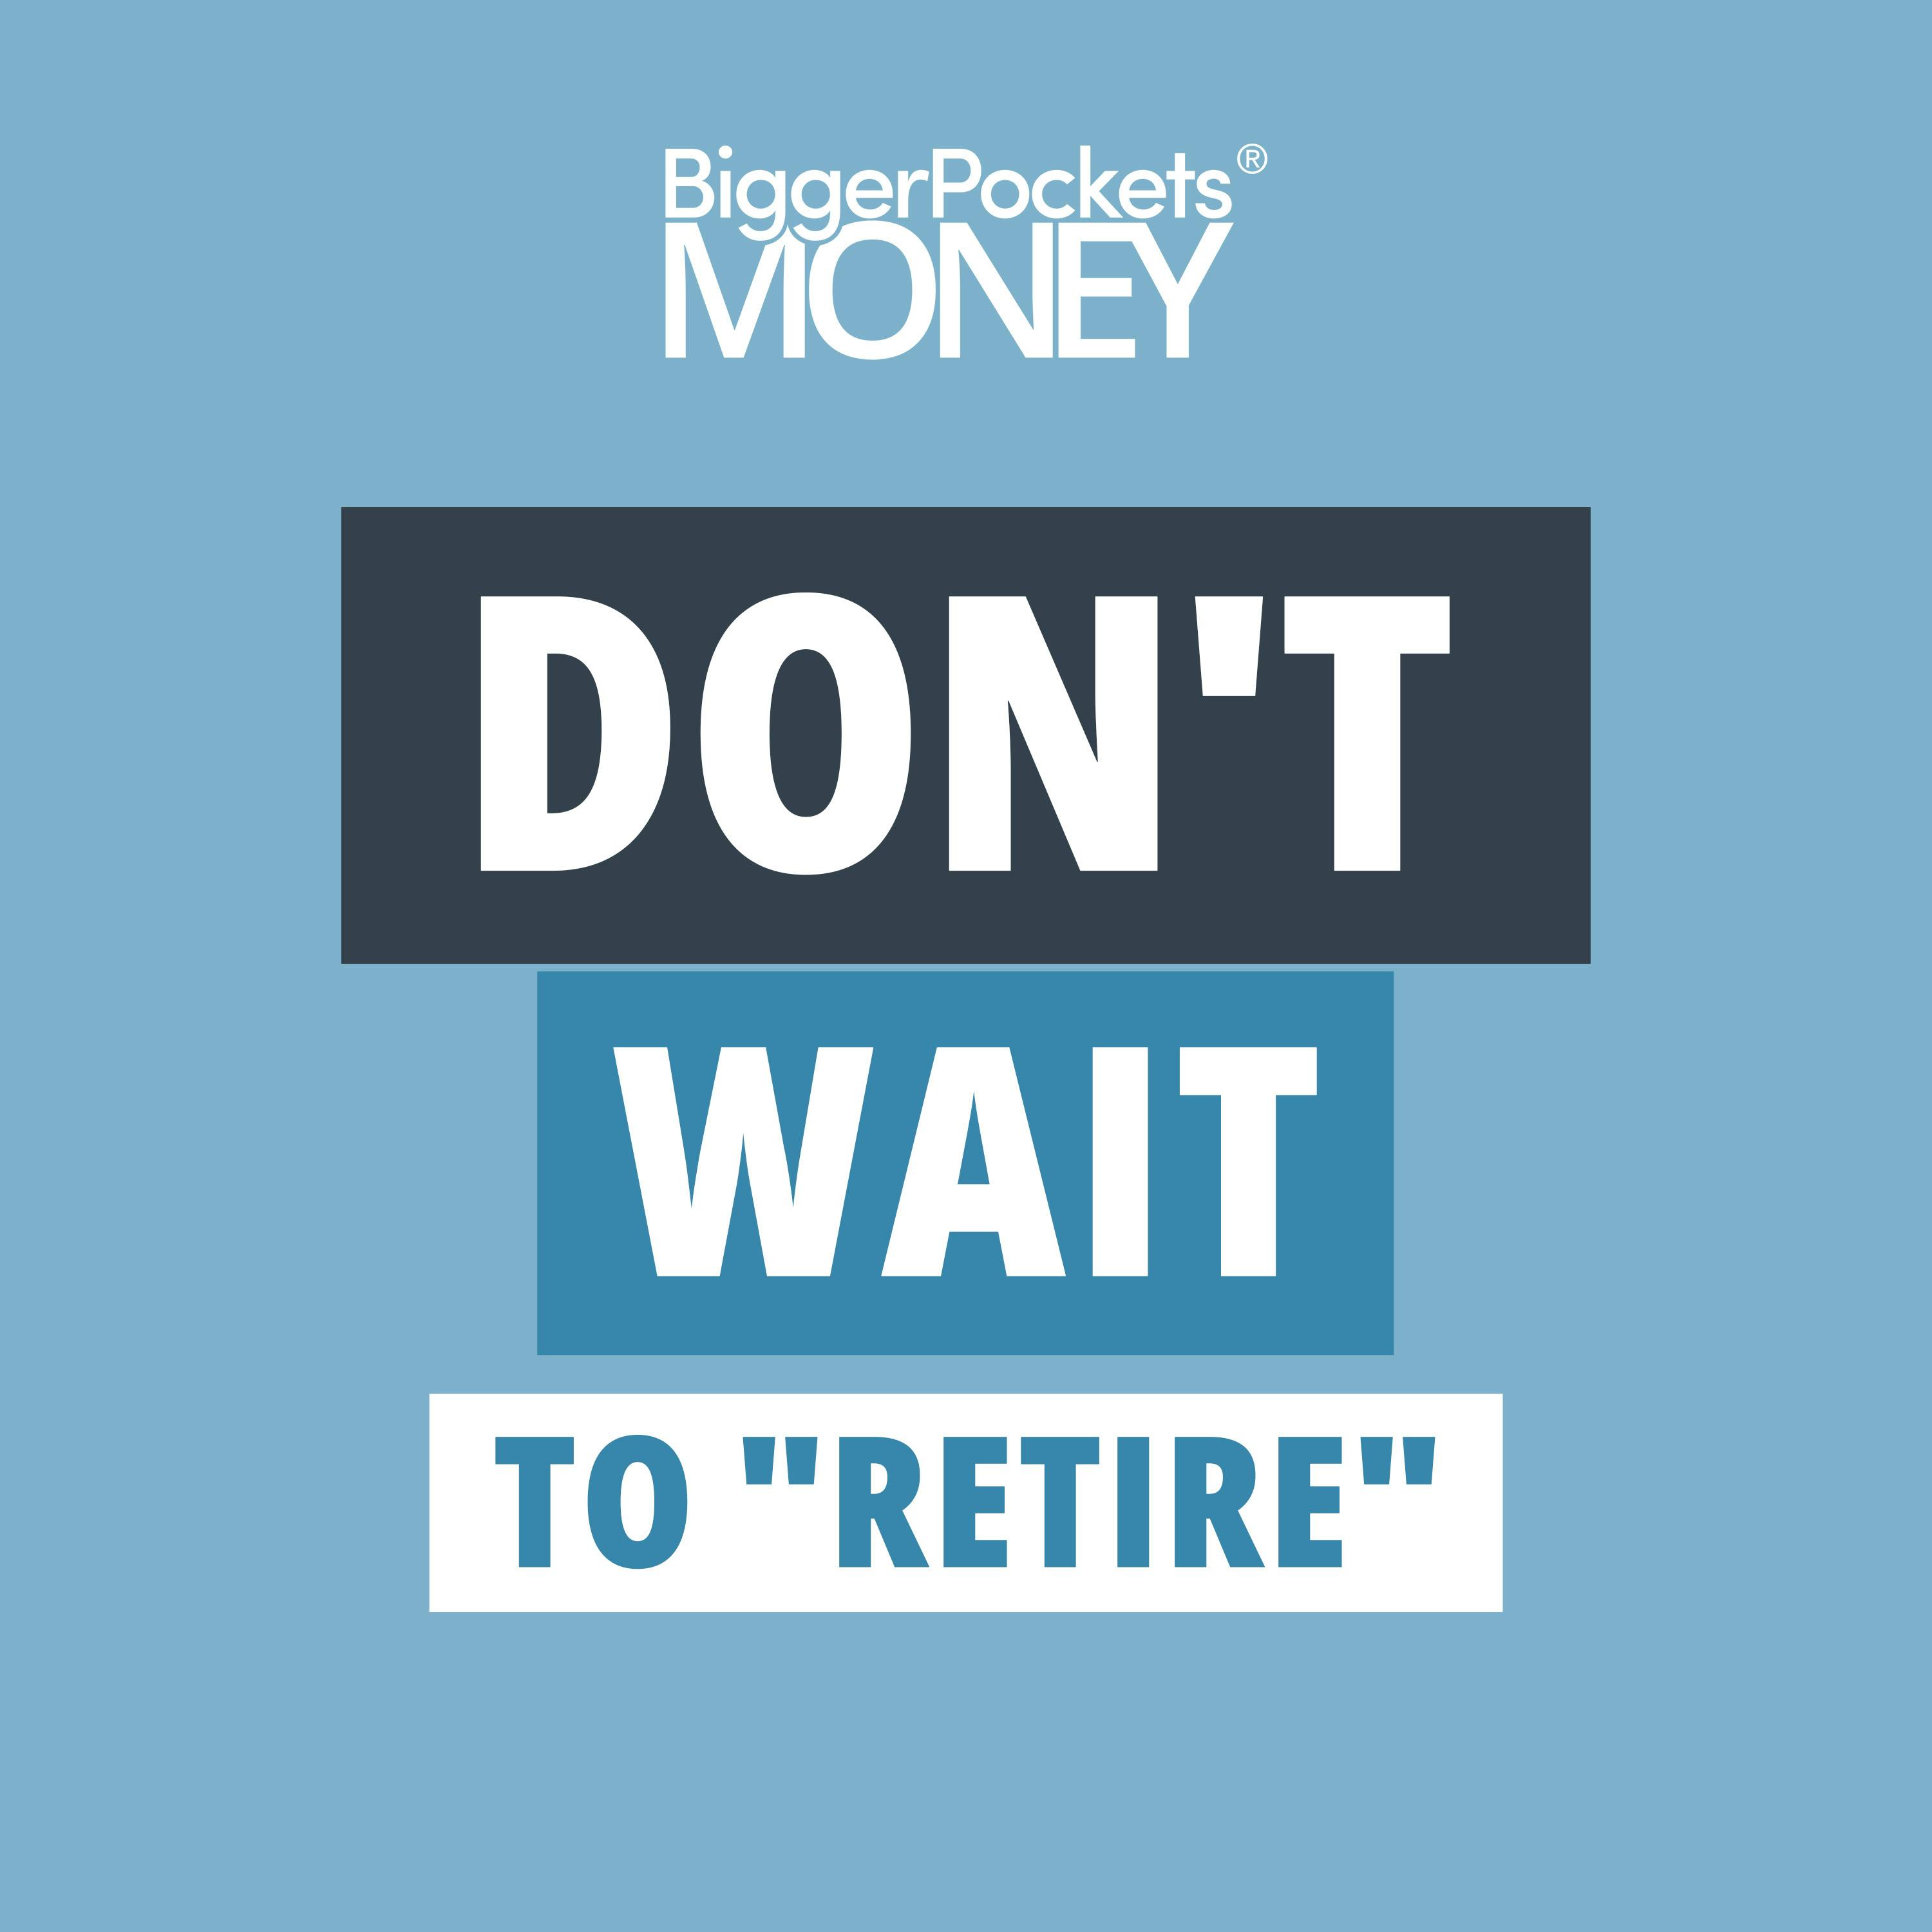 415: Finance Friday: How to Achieve Your “Dream Life” Decades Before Retirement